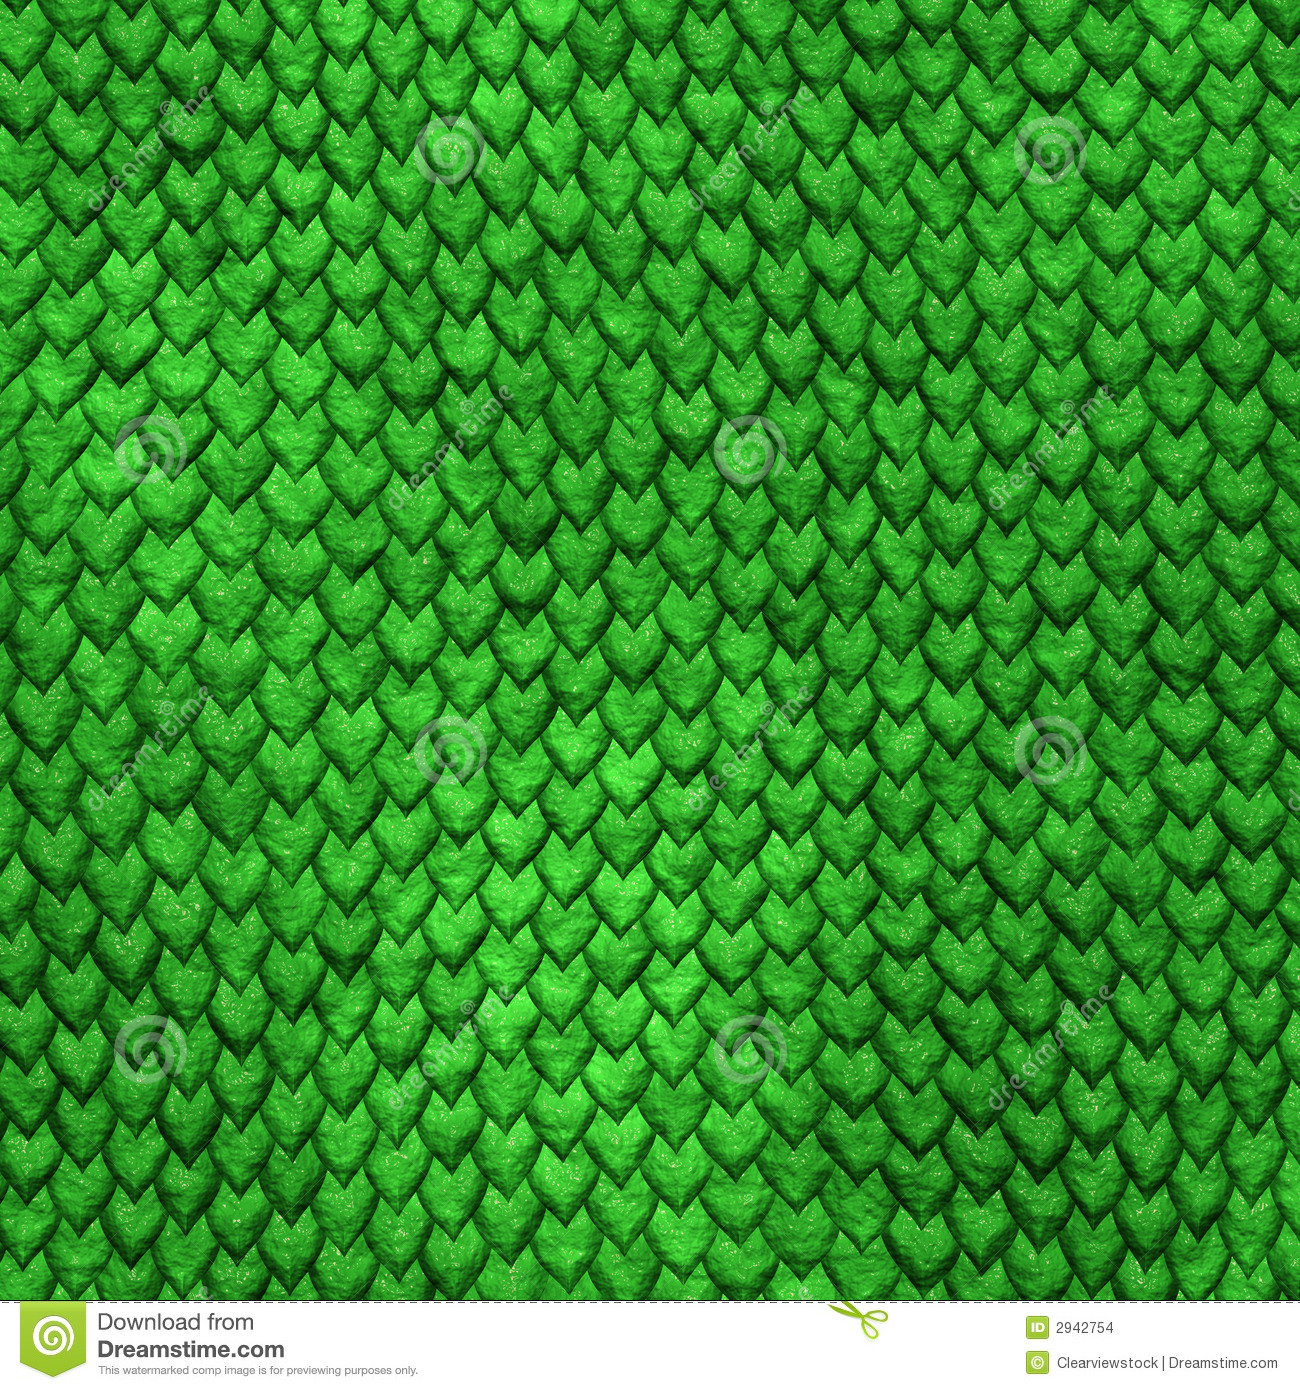 Dragon Skin Green Scales Background Stock Images   Image  2942754